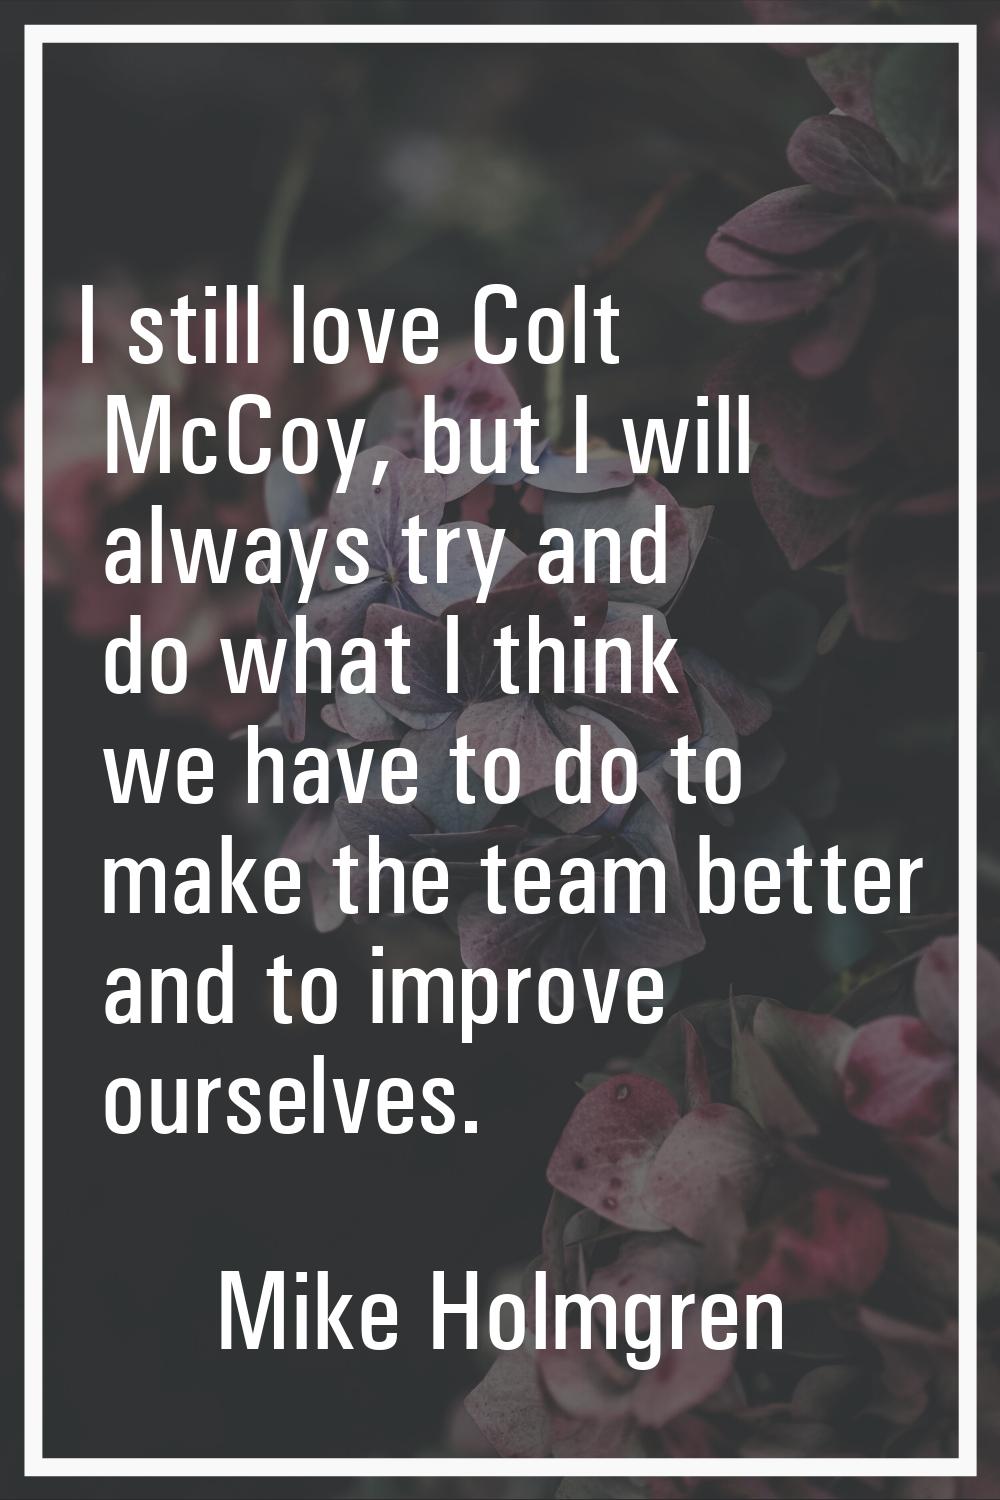 I still love Colt McCoy, but I will always try and do what I think we have to do to make the team b